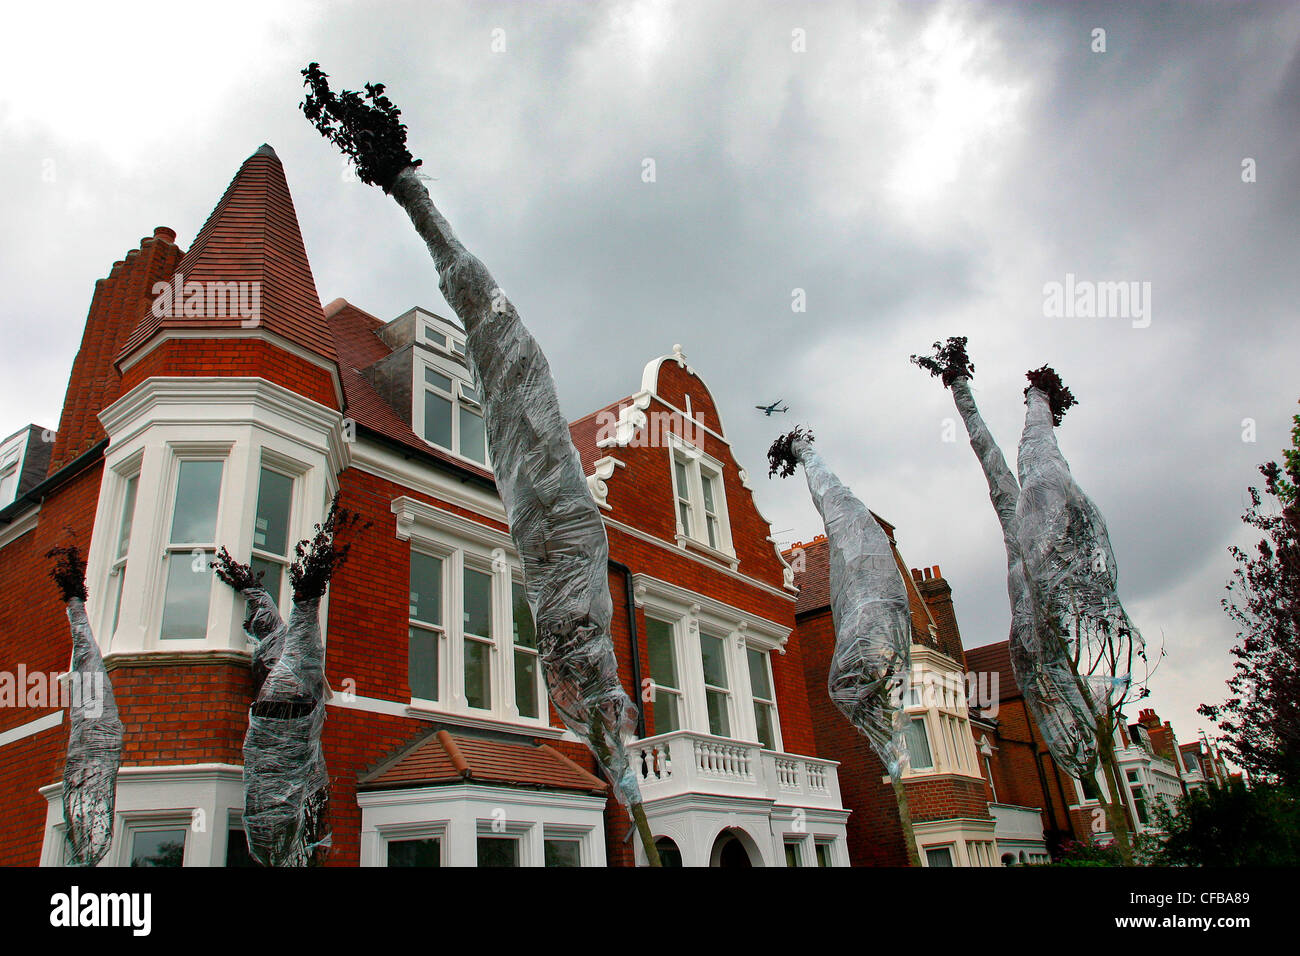 Trees wrapped in protective sheeting on street, with red edwardian houses in background Stock Photo